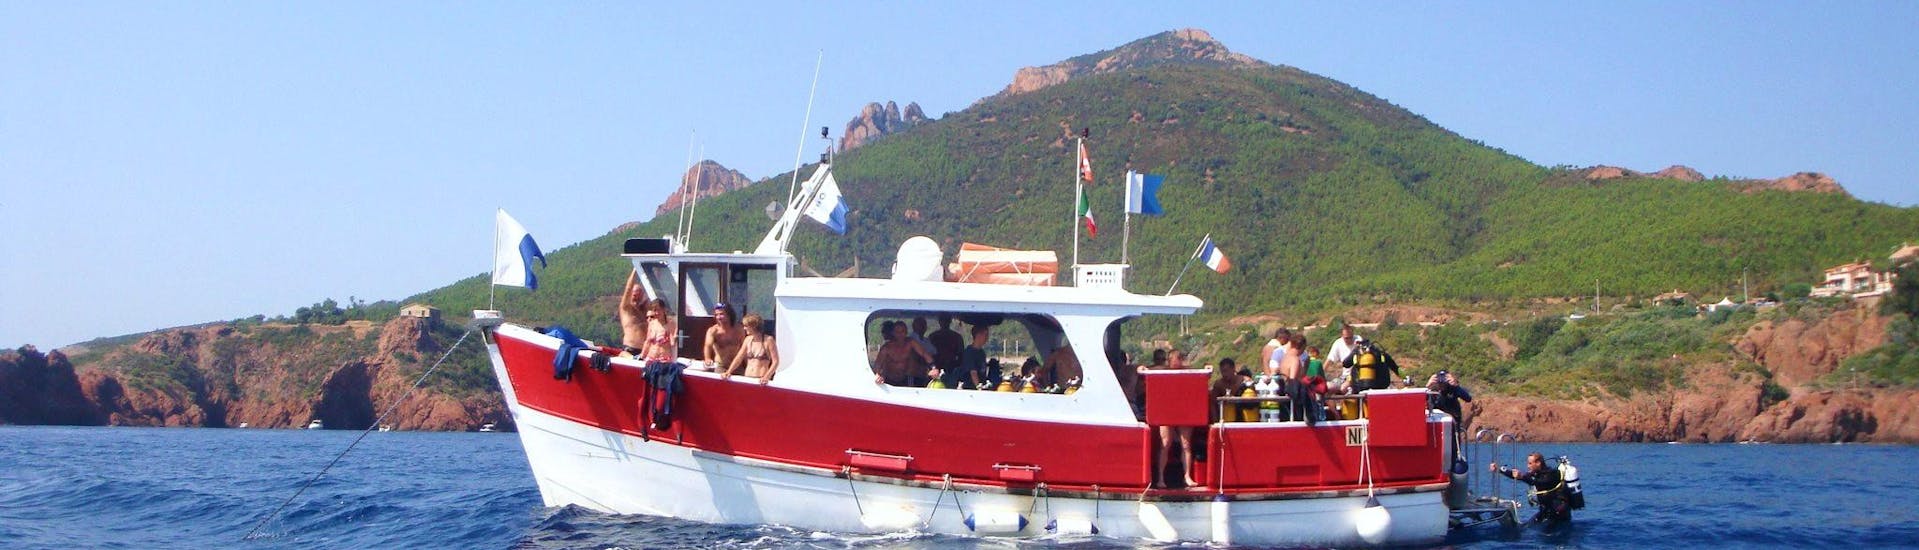 View of the Dive Center La Rague boat in front of the Estérel massif used for snorkeling trips and diving courses near Cannes.